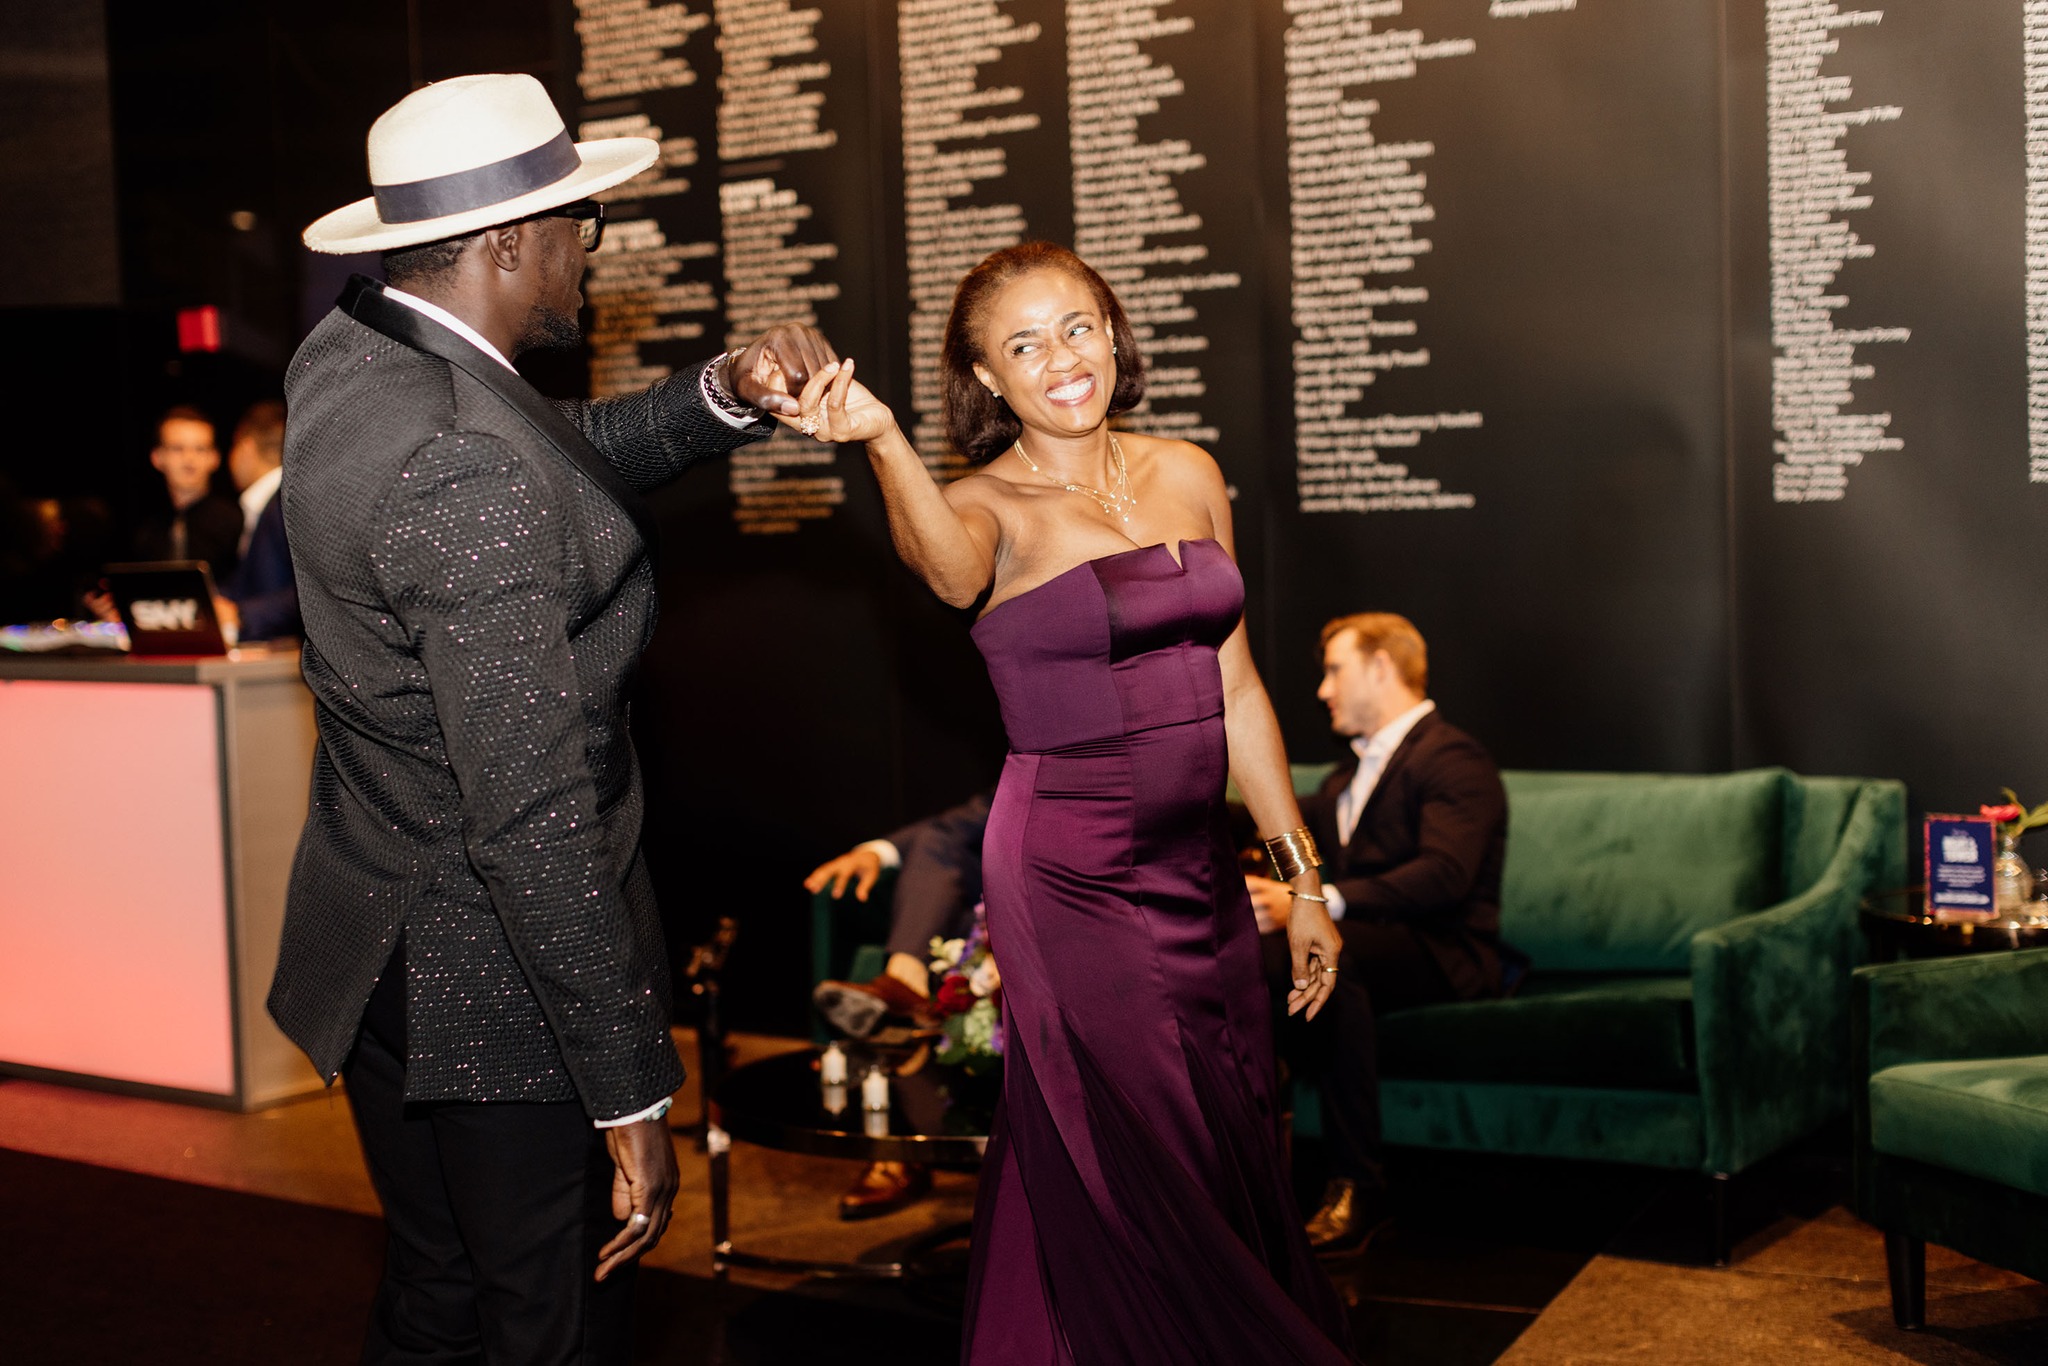 Modern photograph of a Black man in a suit and white brimmed hat twirling a Black woman in a purple satin evening gown